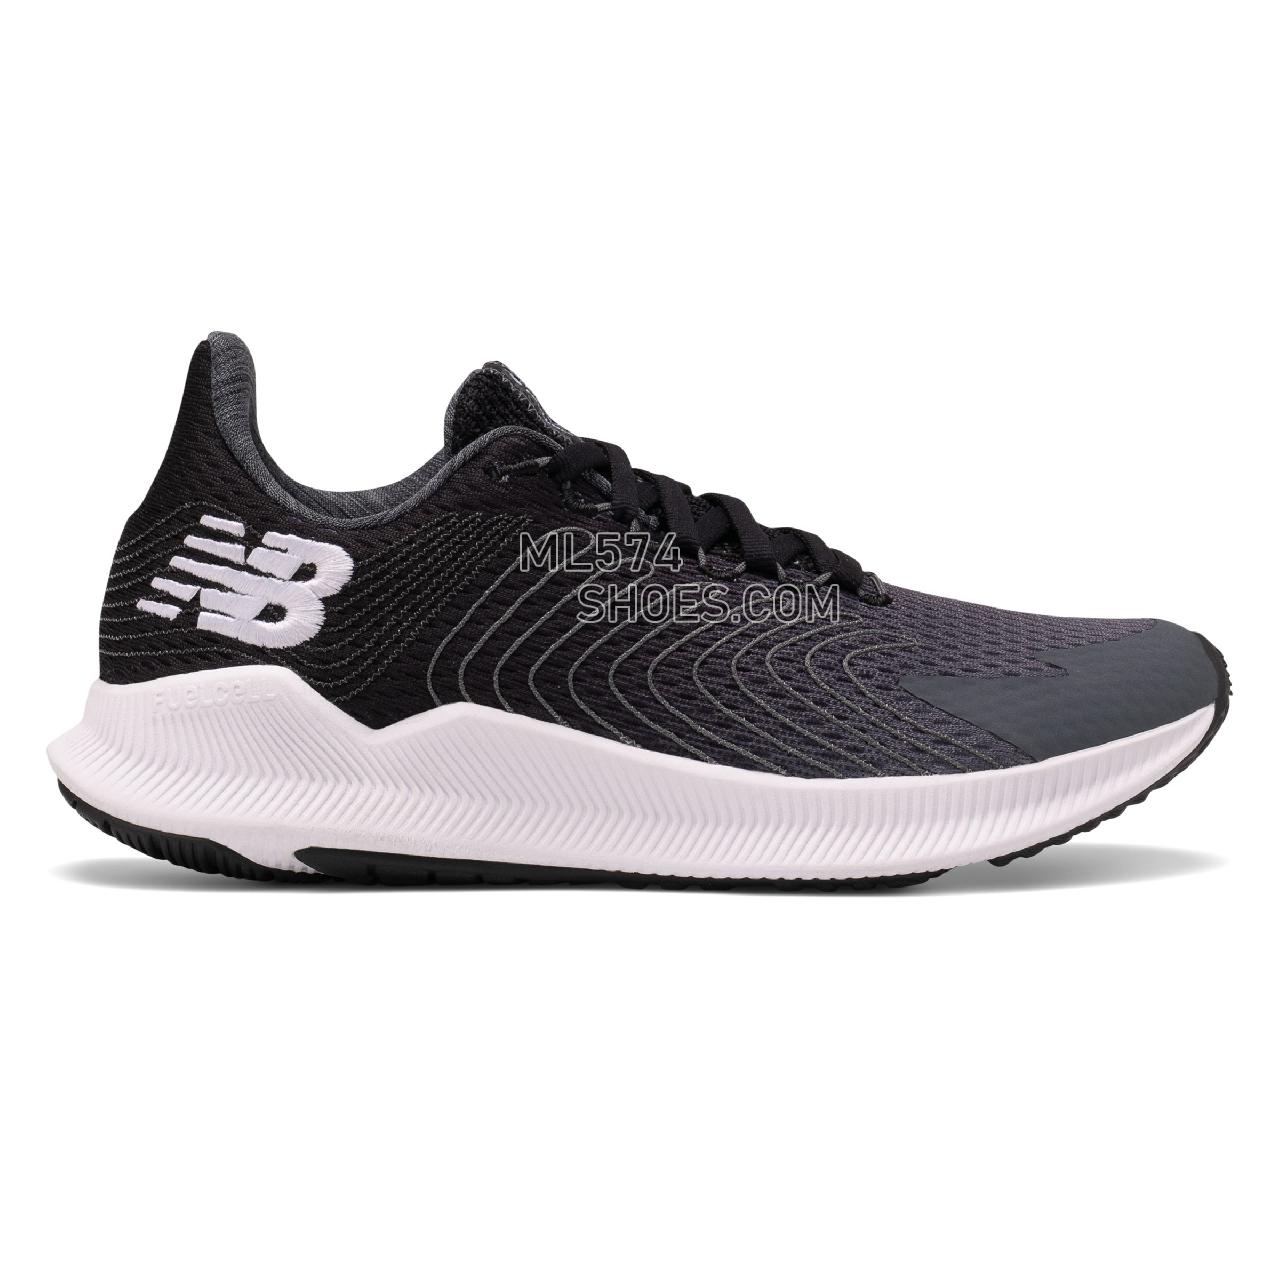 New Balance FuelCell Propel - Women's Neutral Running - Lead with Black and White - WFCPRLB1